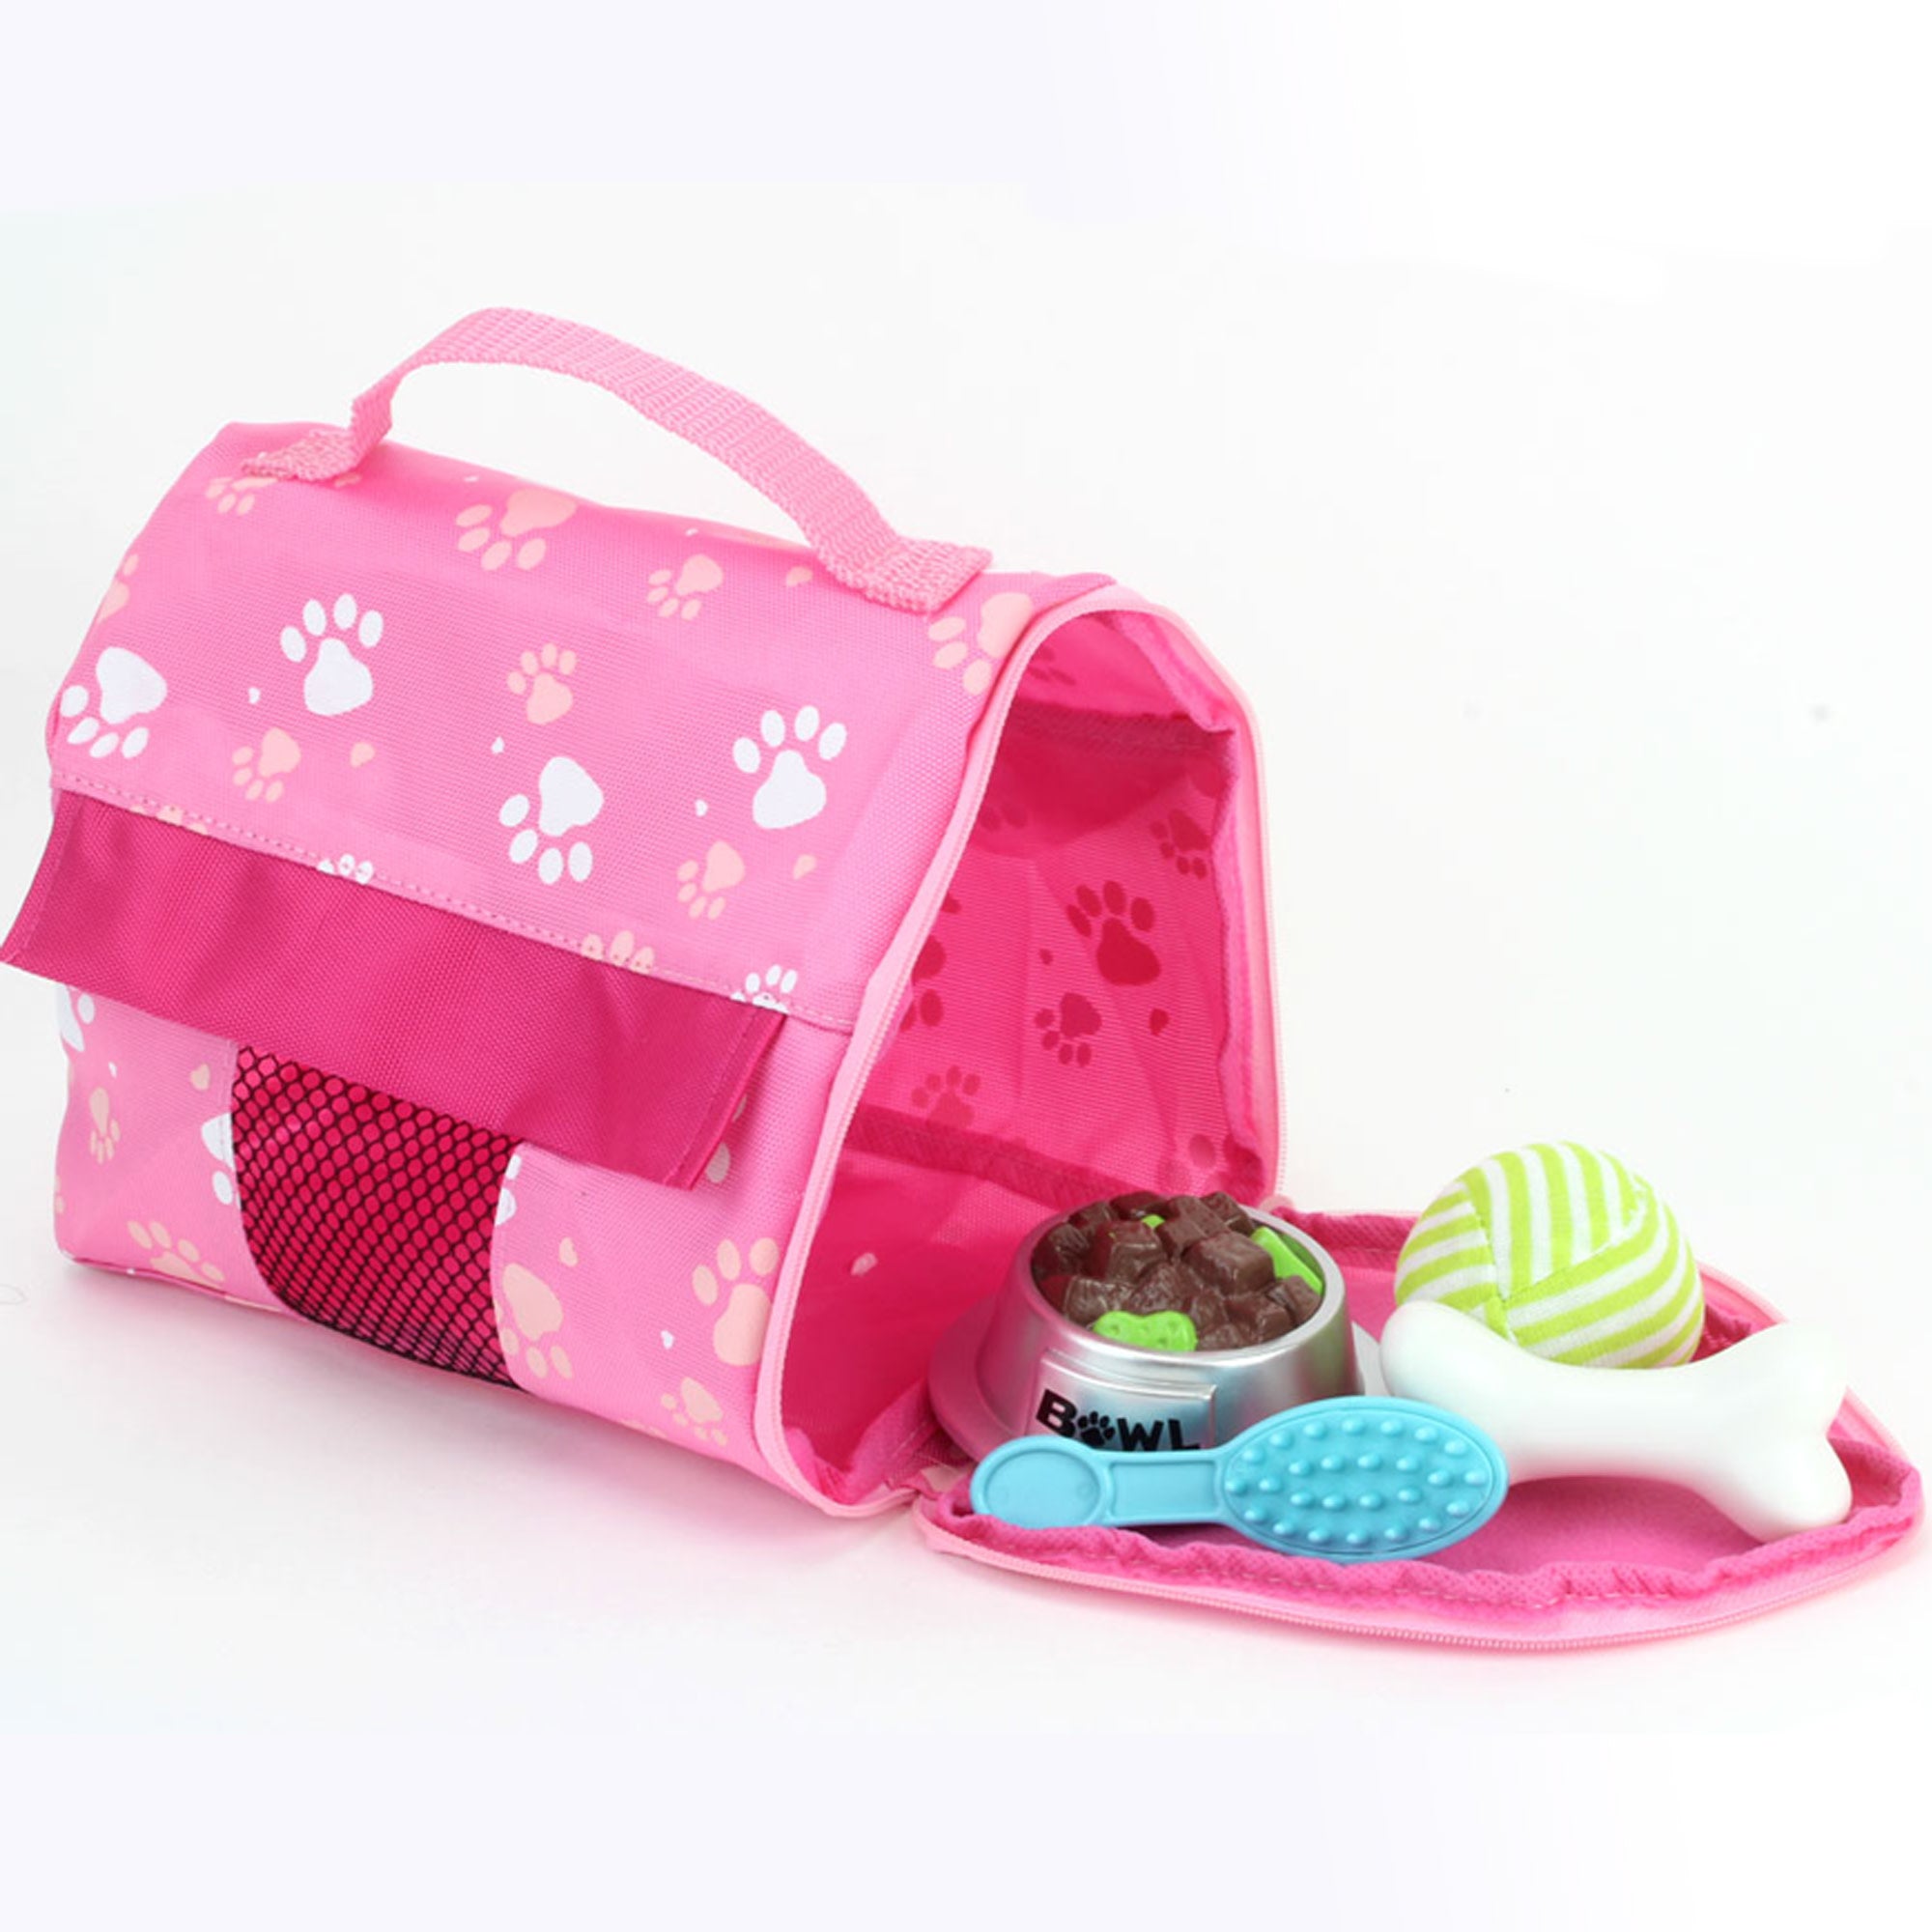 Sophia’s Plush Puppy with Carrier and Accessories for 18" Dolls